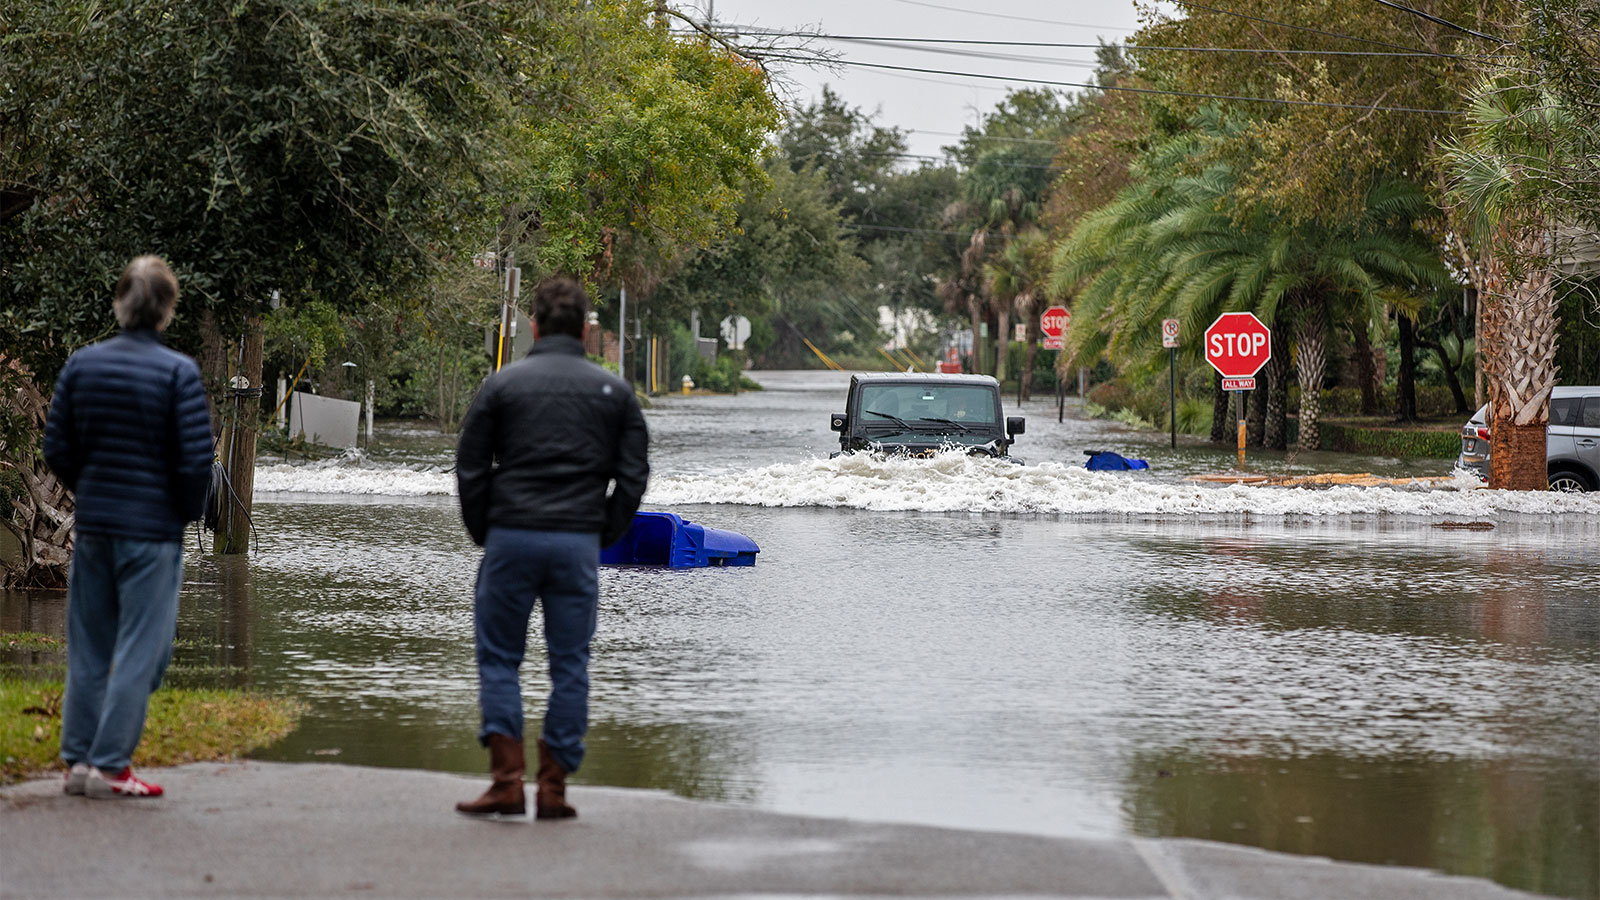 Two people looking down a flooded street at a Jeep driving through feet of water